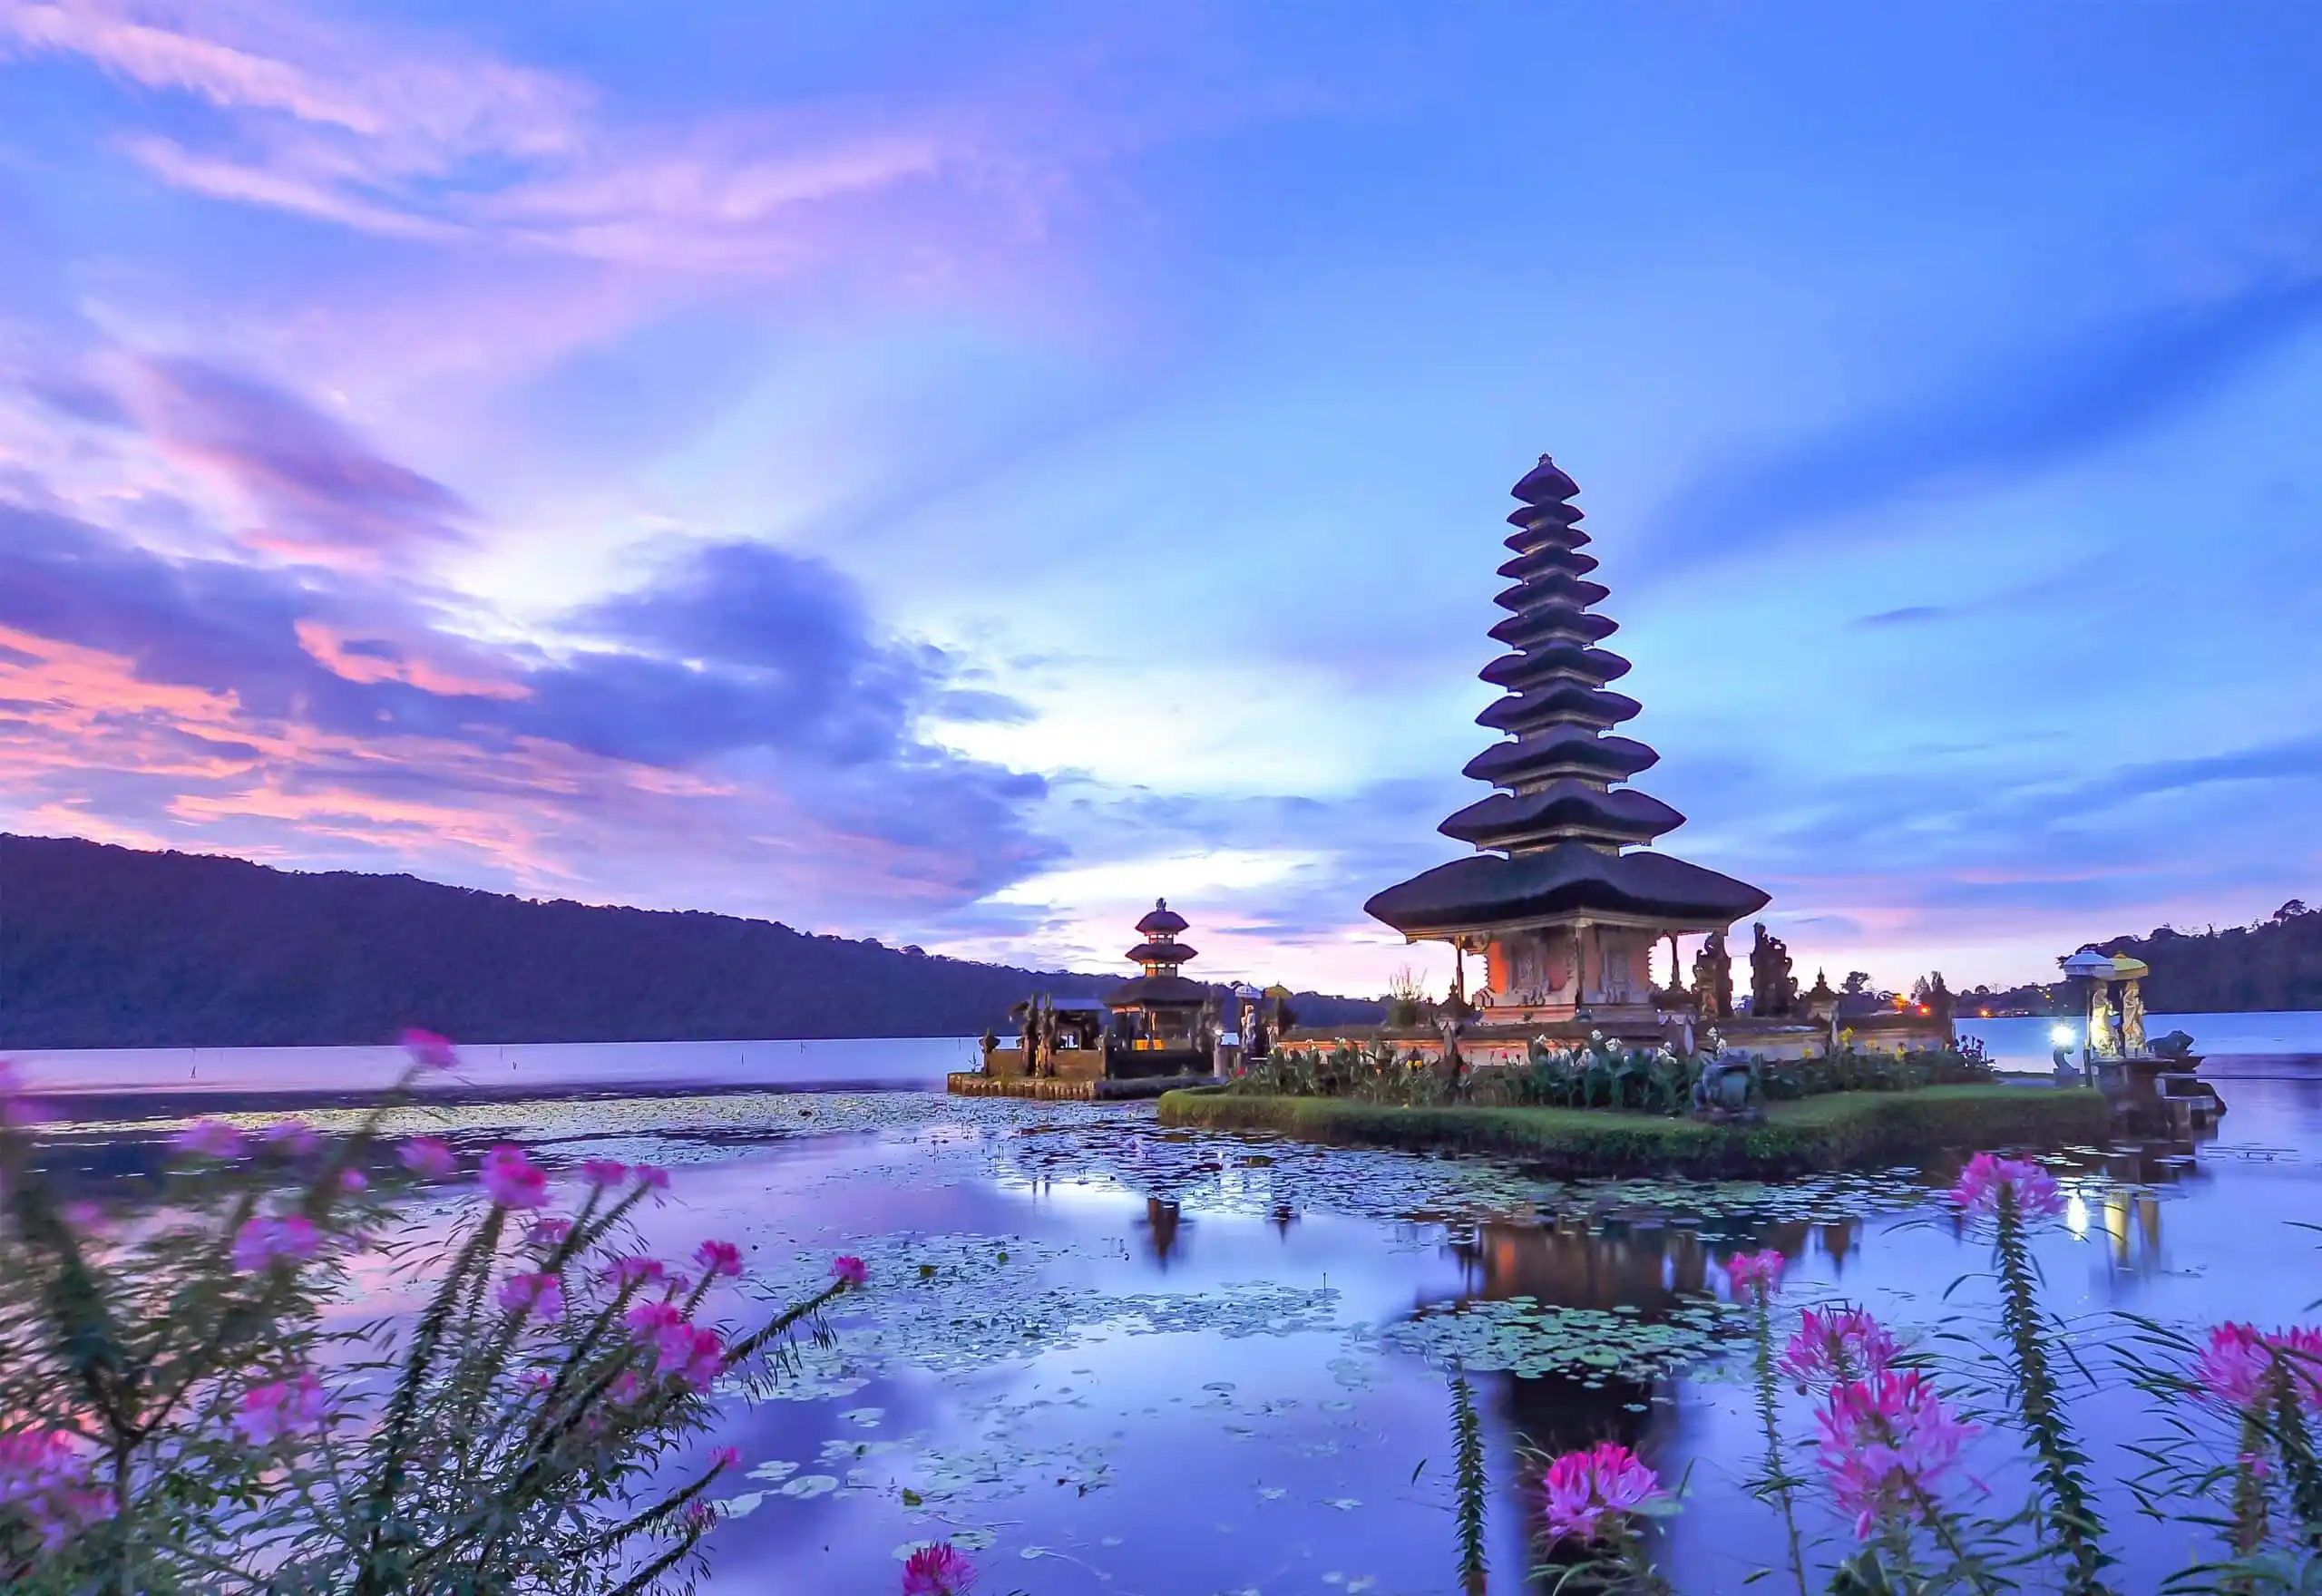 Secretarial and Administration Courses in Bali